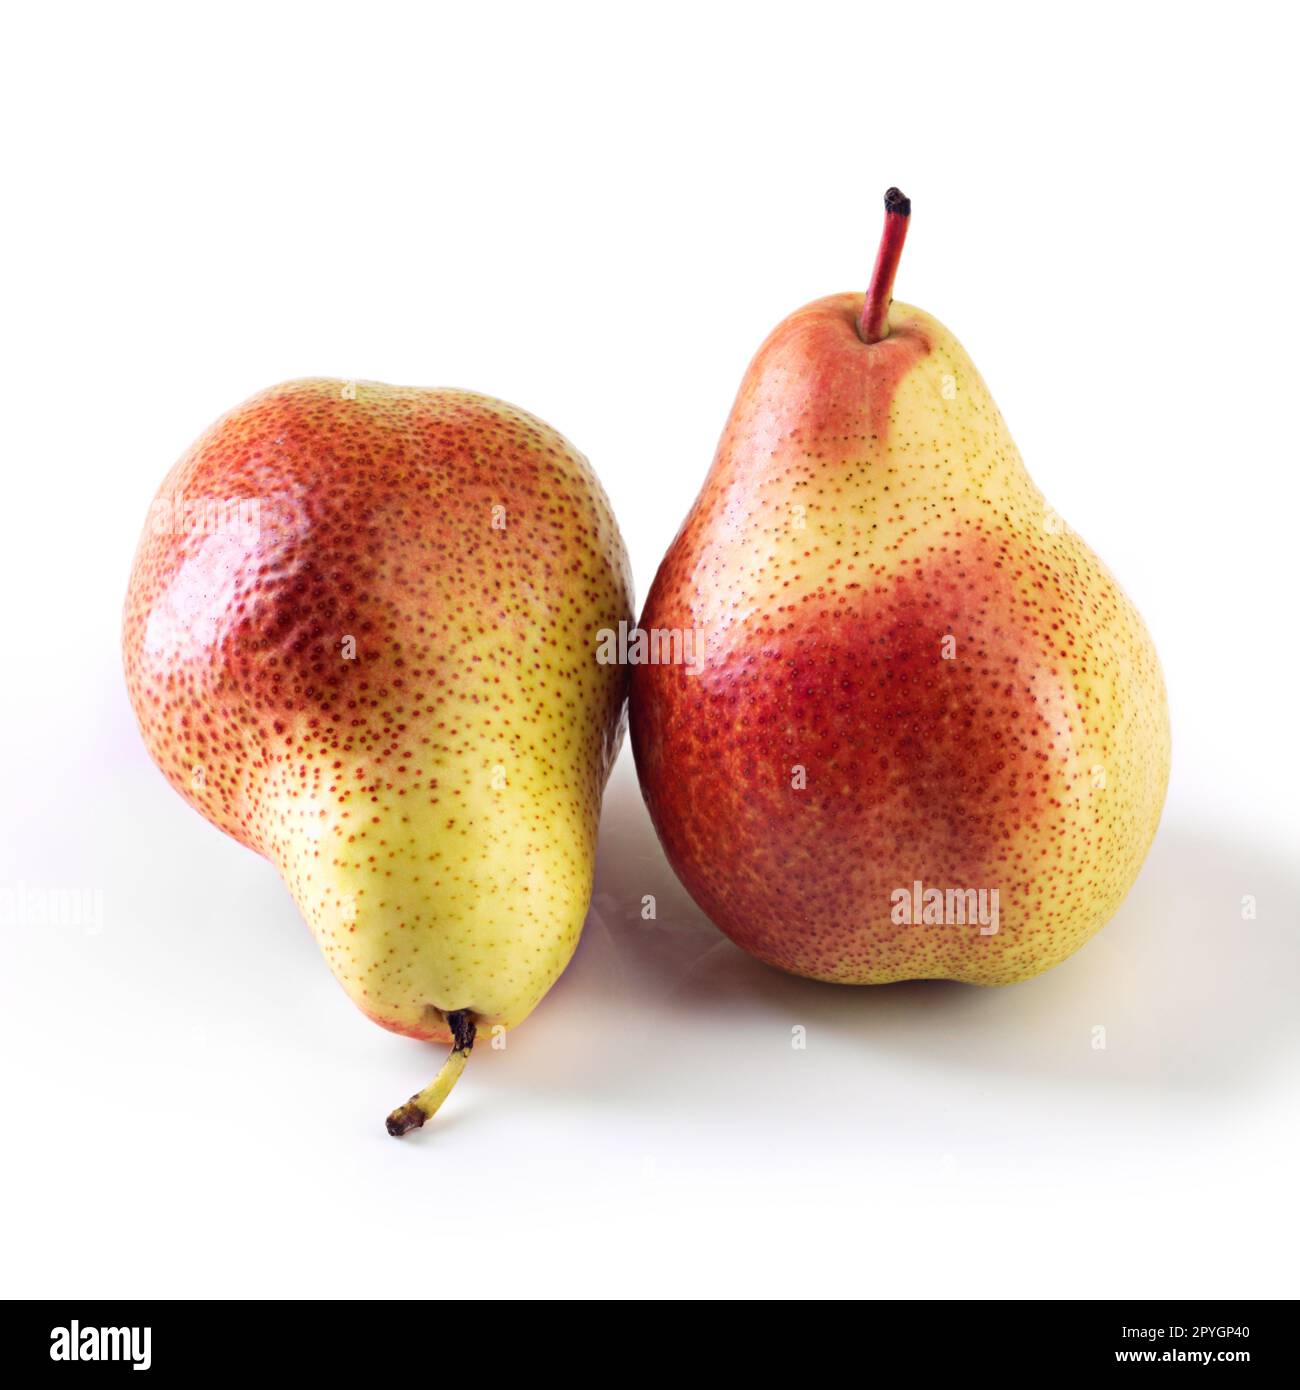 The perfect pear. Studio shot of ripe pears against a white background. Stock Photo